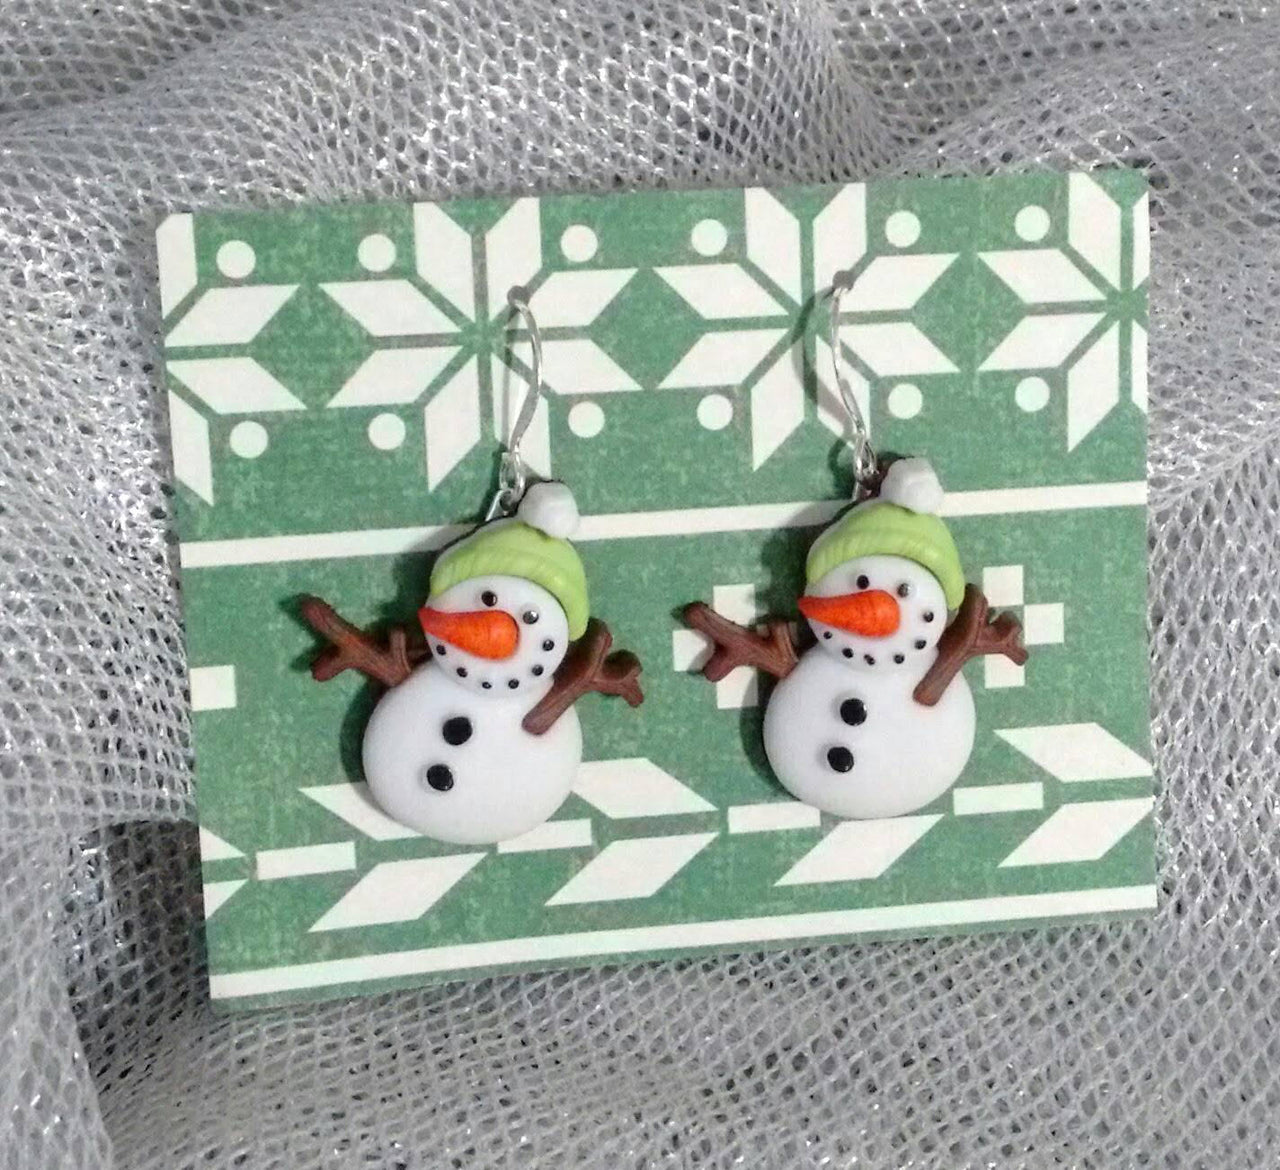 snowman with scarf earrings snowman jewelry snowmen Christmas earrings snowman earrings holiday earrings gifts for her gifts under 10 winter